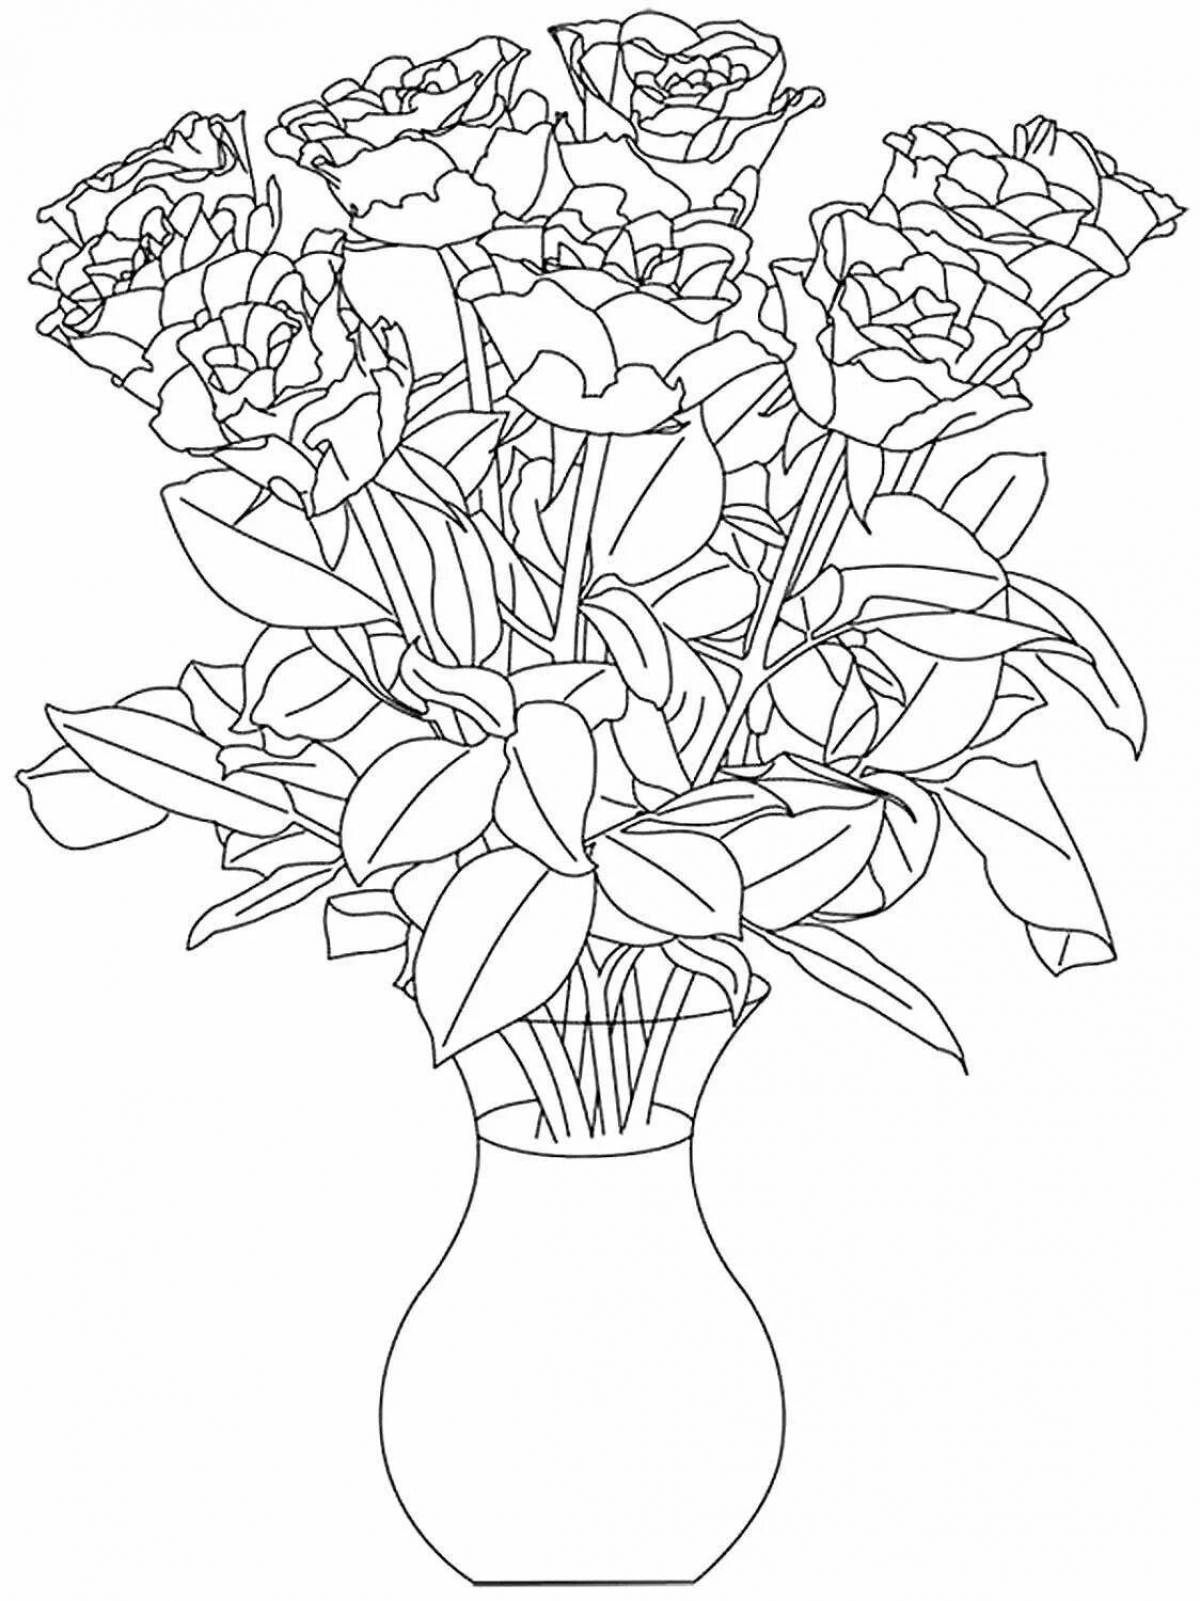 Coloring page graceful large flowers in a vase